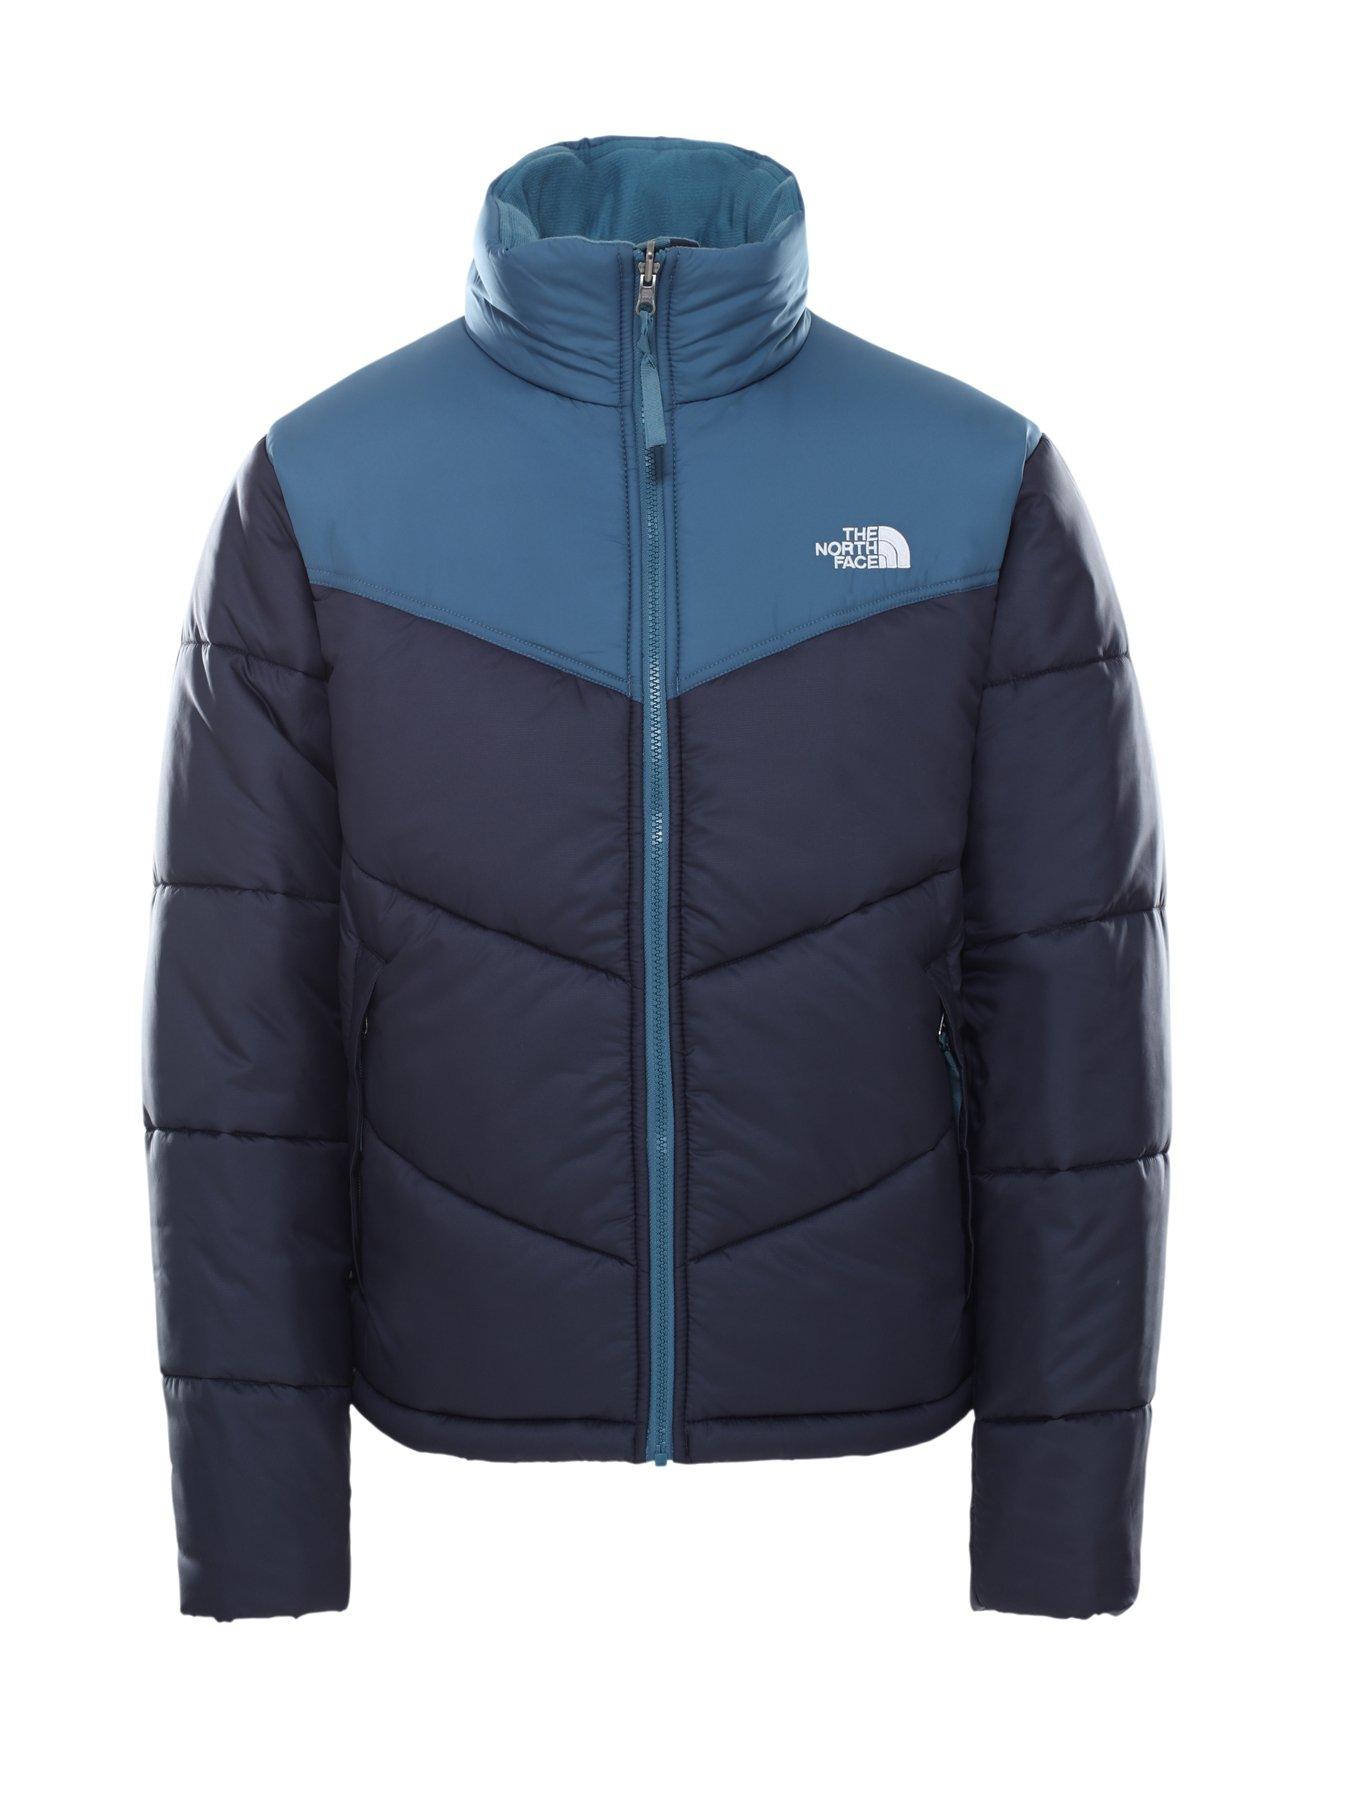 the north face navy blue jacket